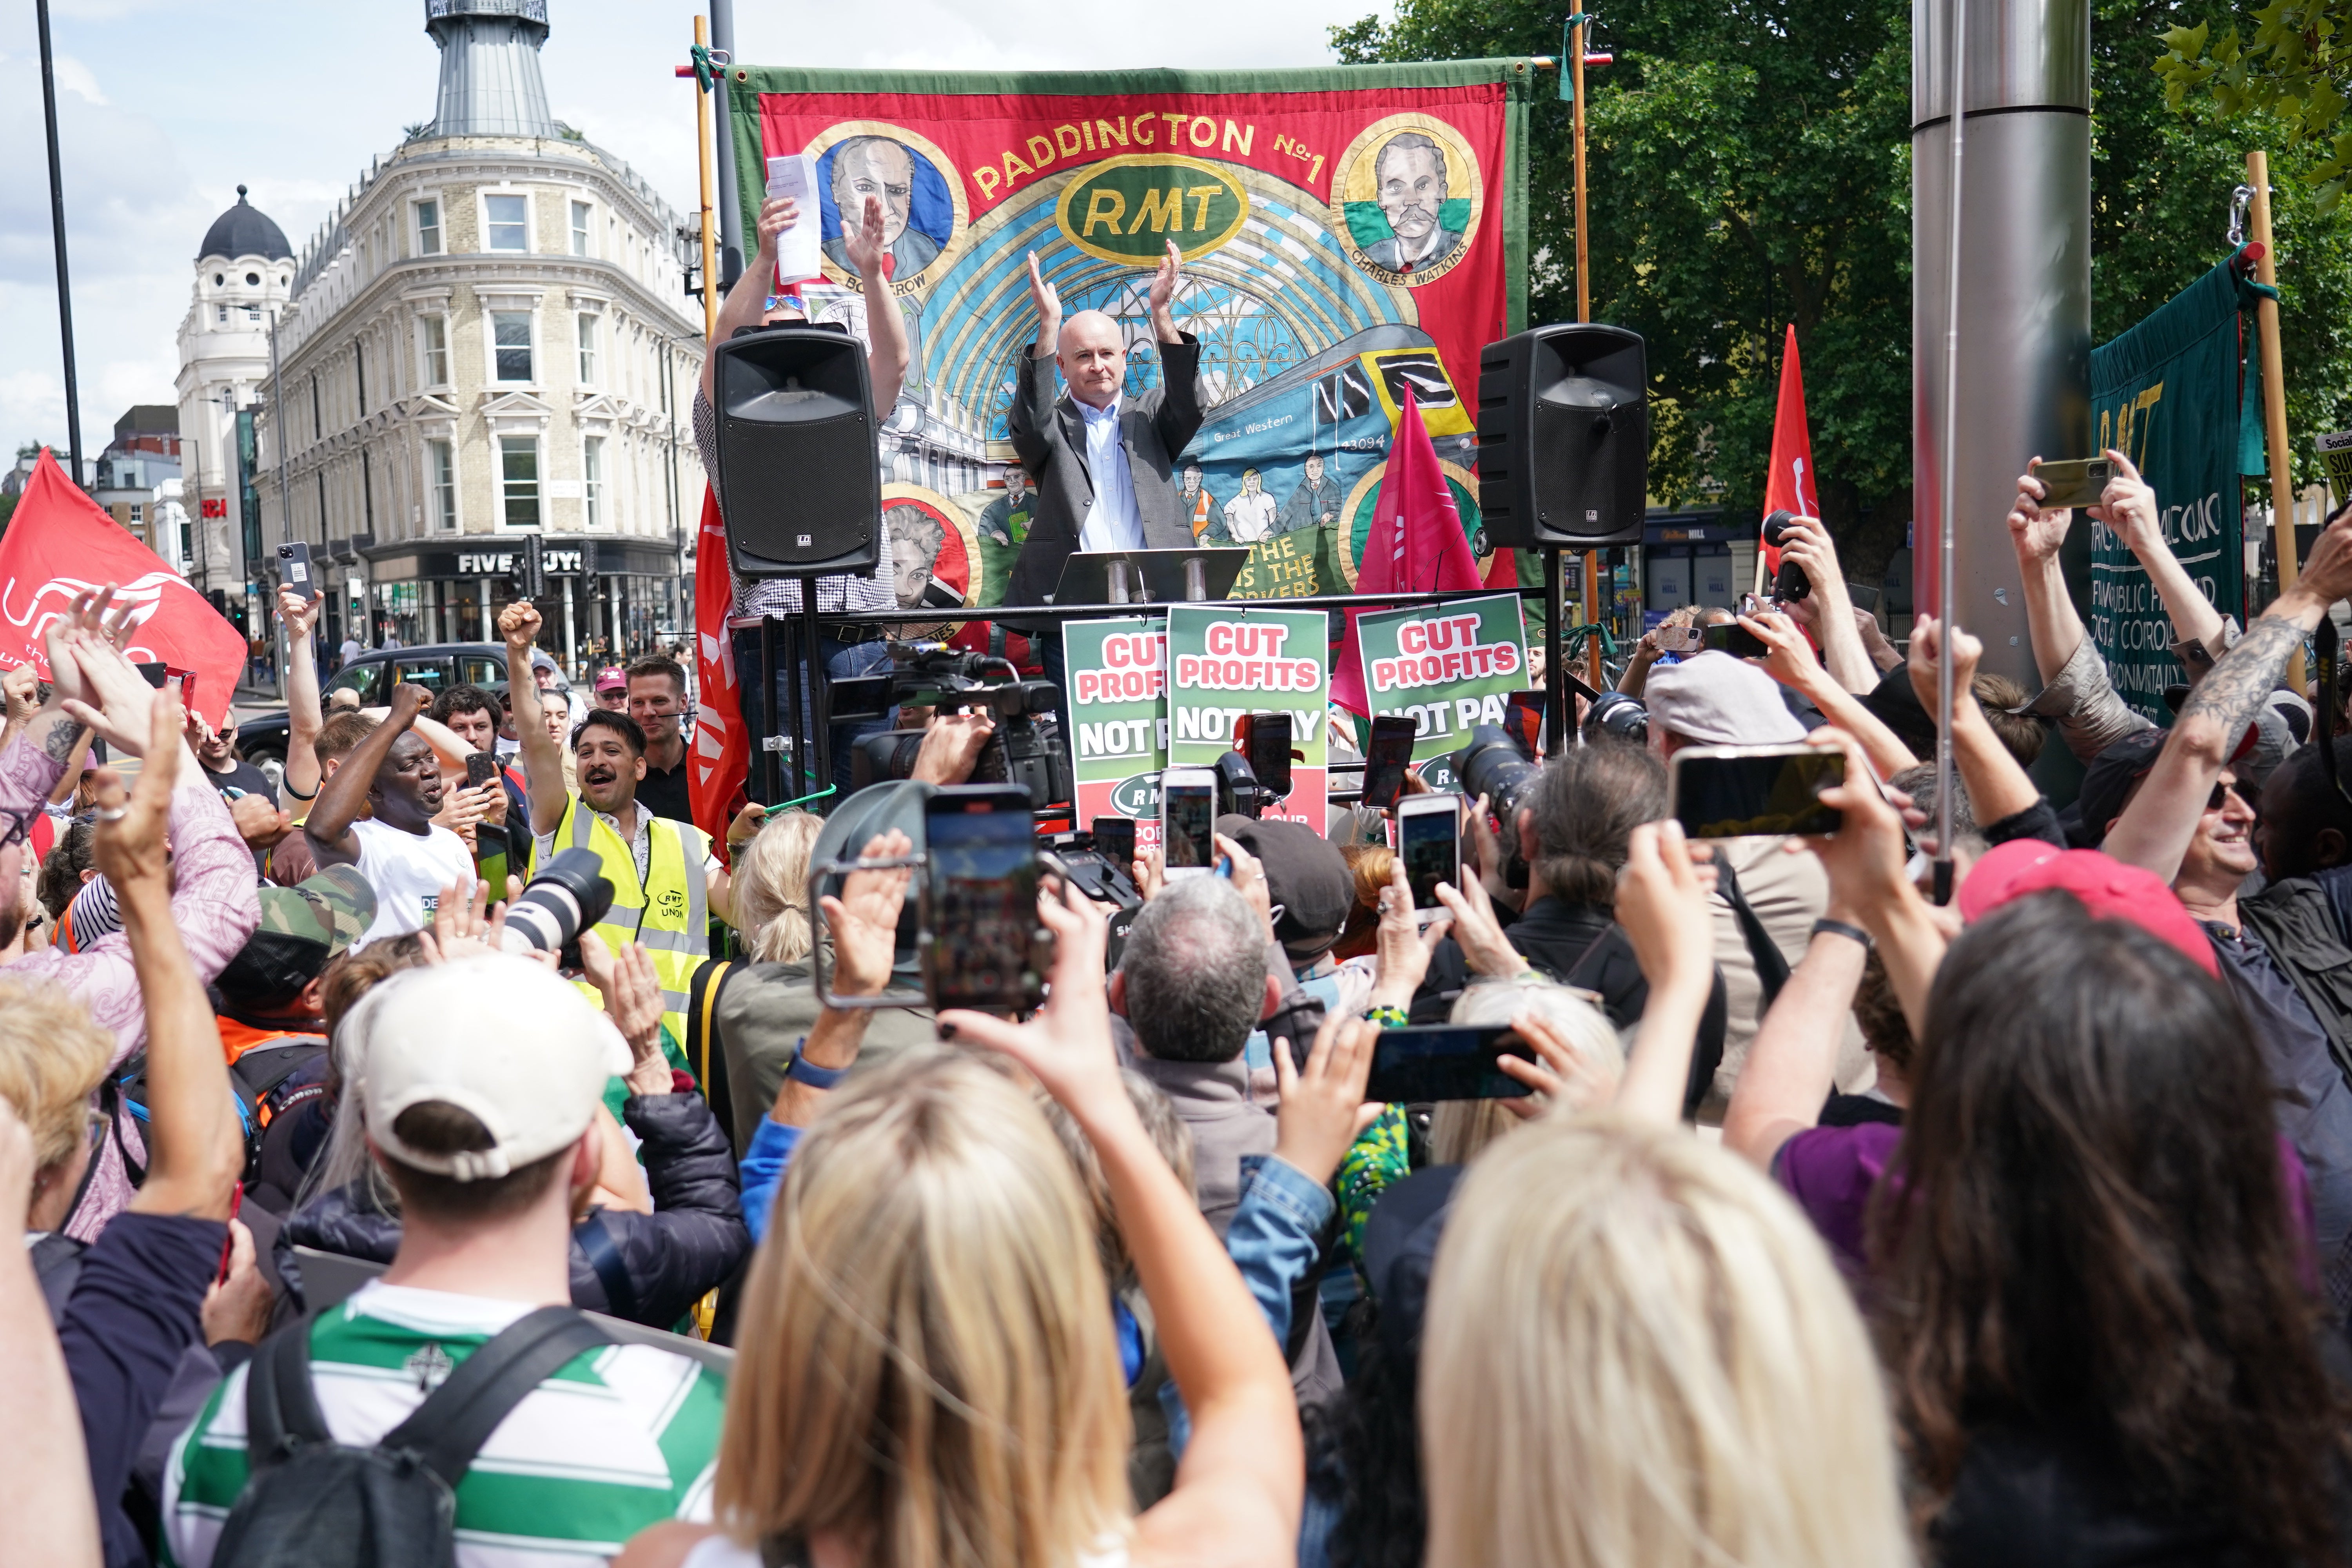 Striking hospital workers turn up at RMT rally in show of support for rail  staff